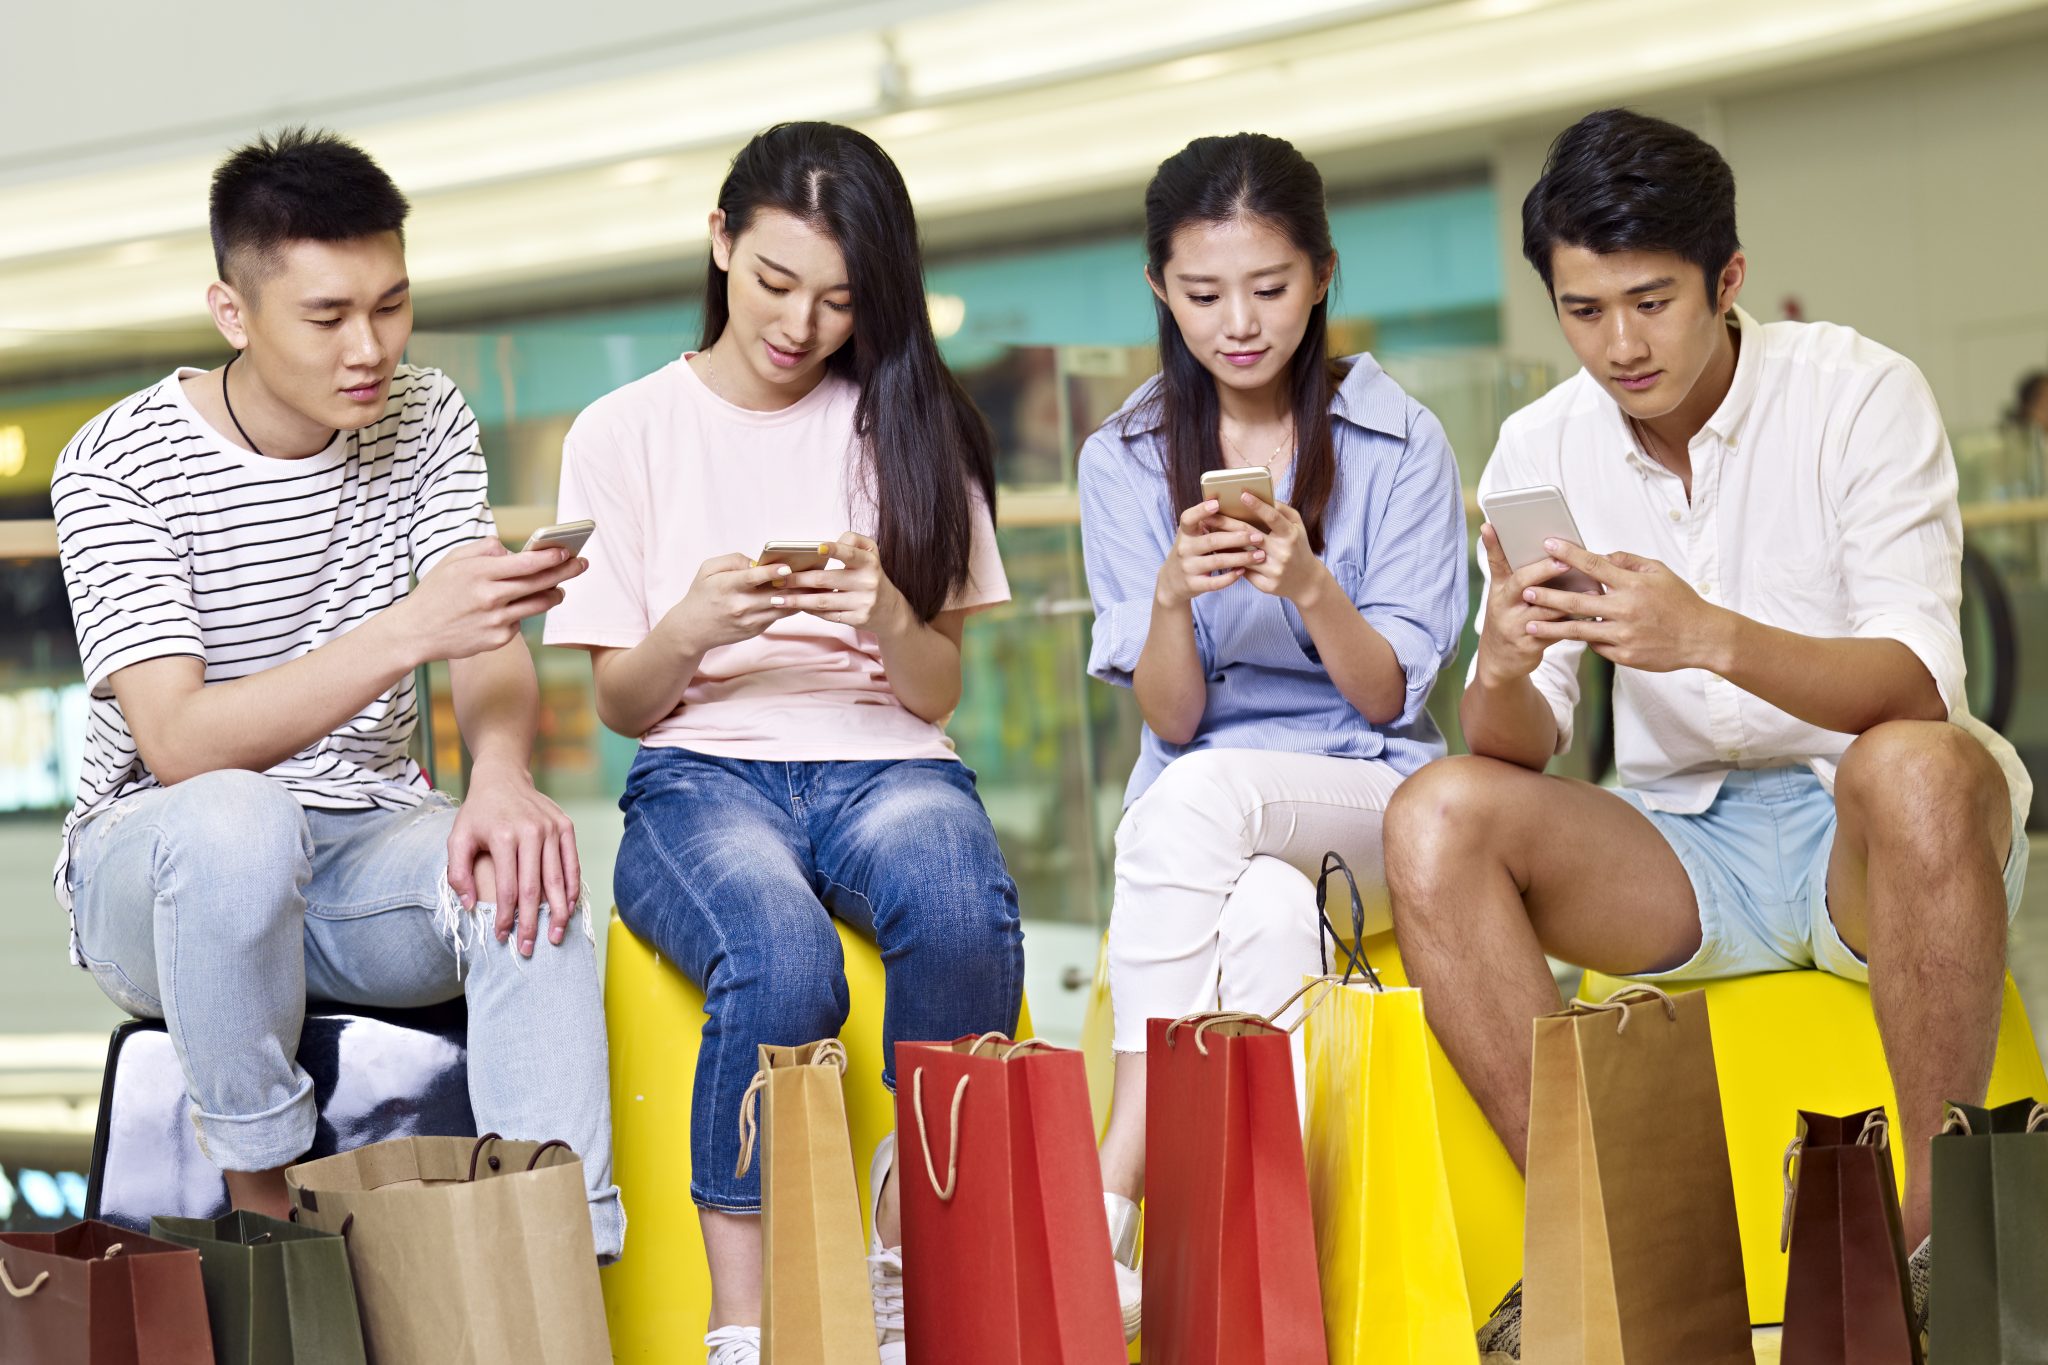 Chinese online shoppers still crave Western goods despite all tensions (survey)